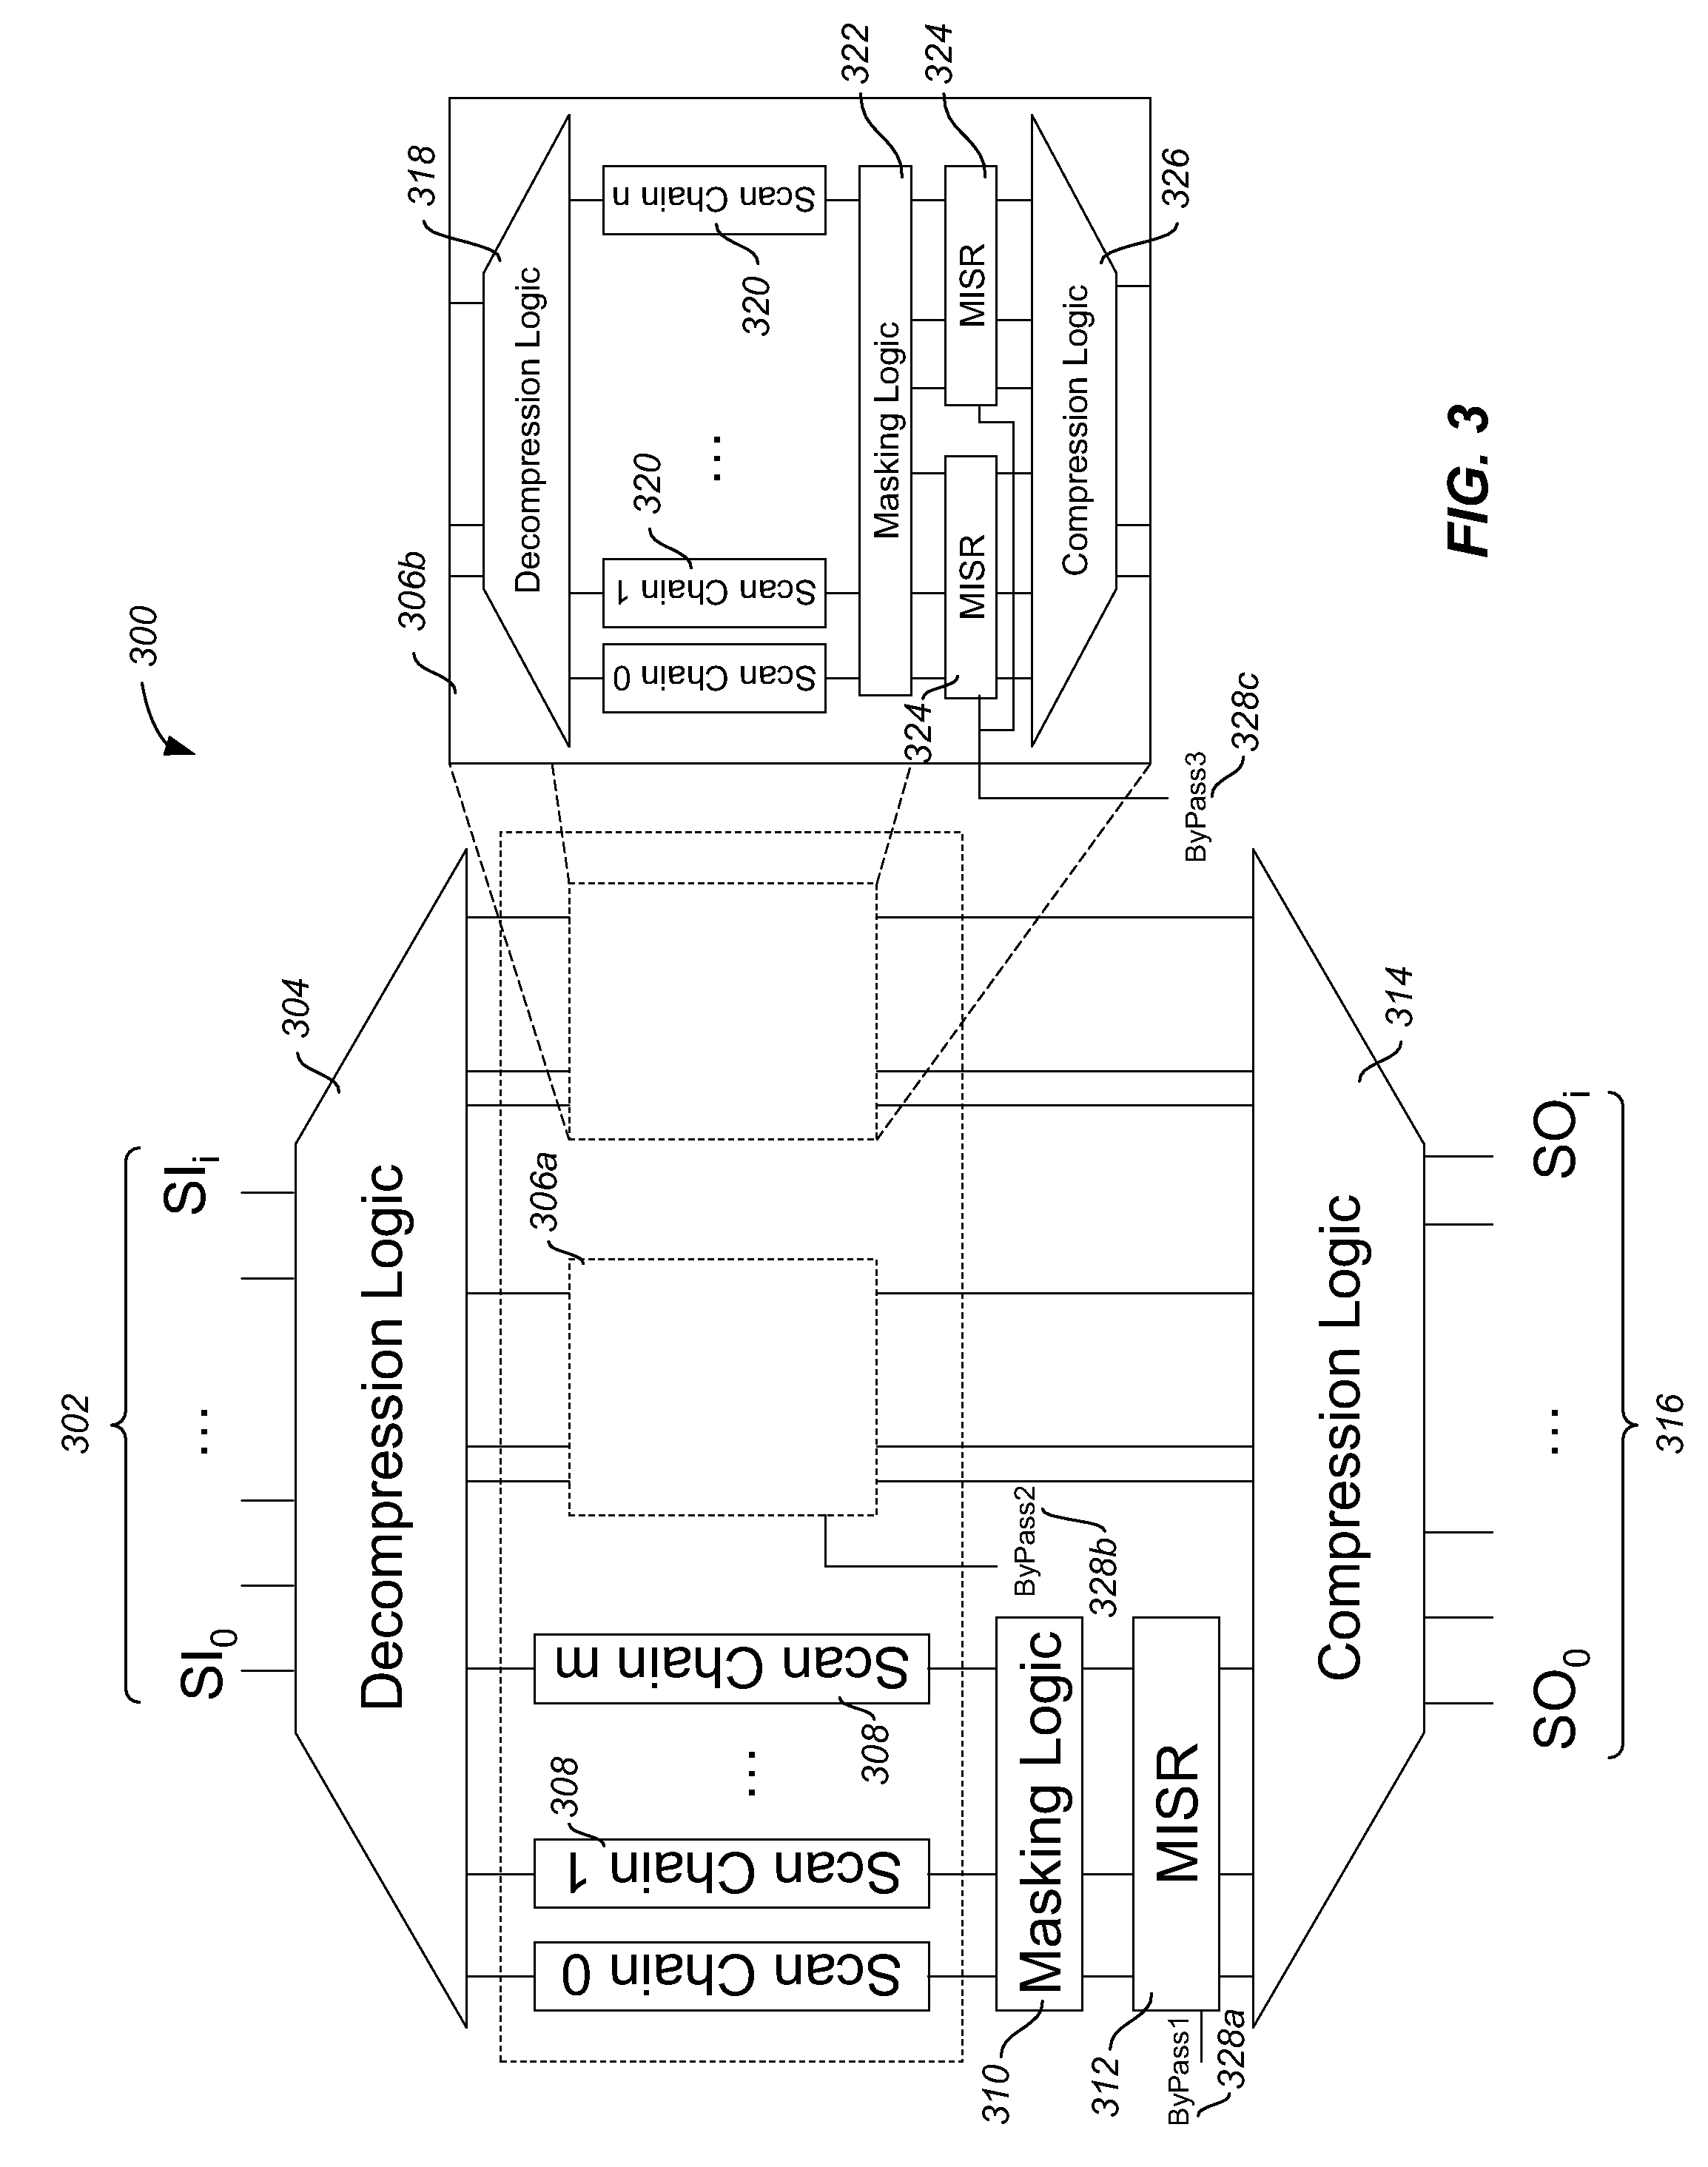 Distributed test compression for integrated circuits